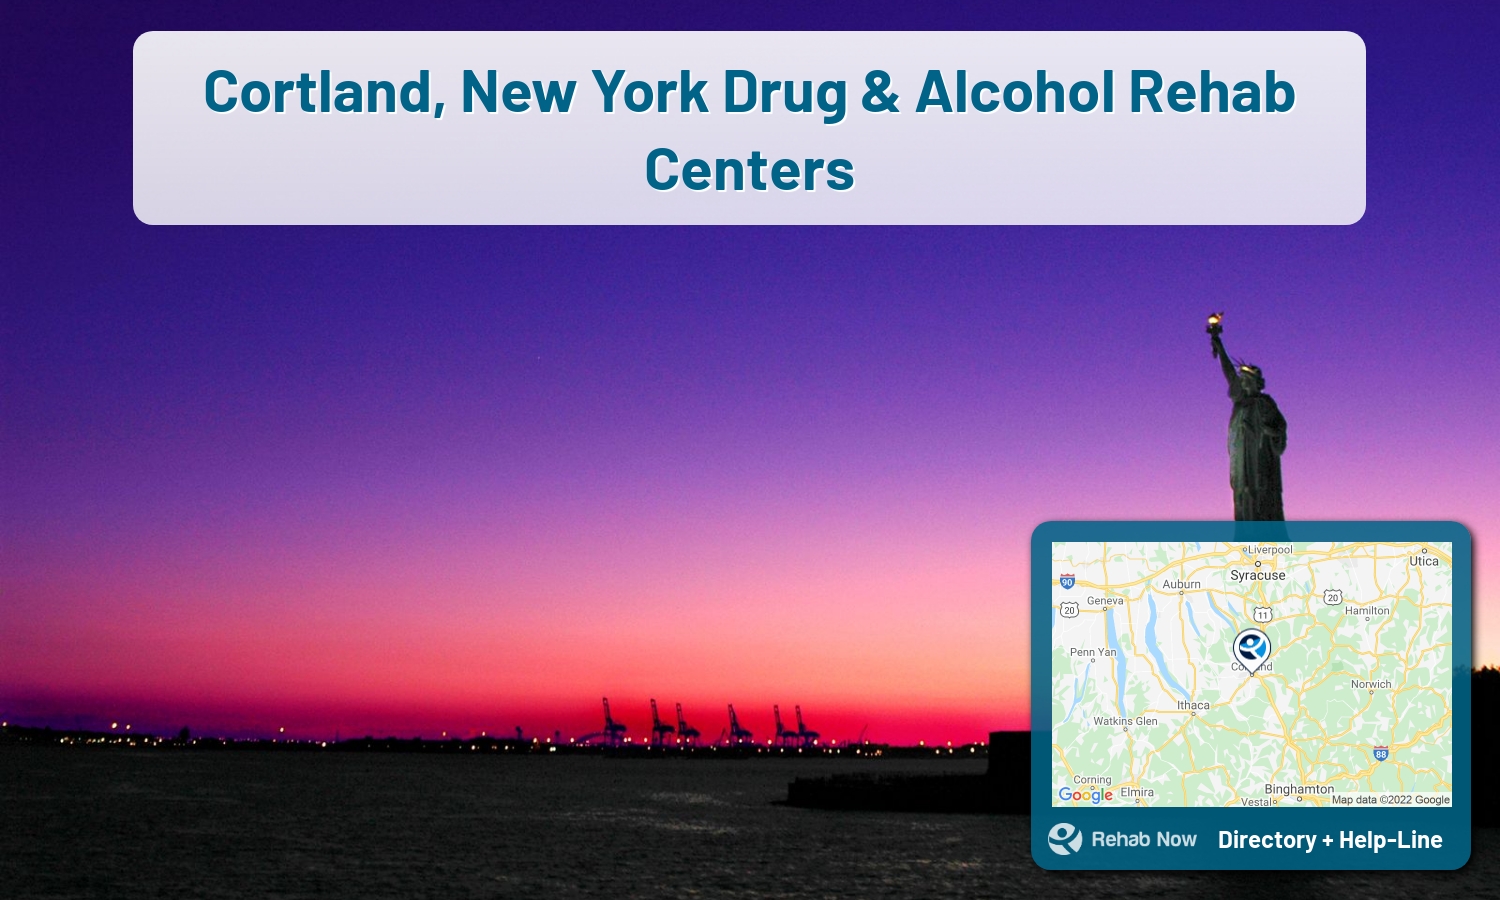 Cortland, NY Treatment Centers. Find drug rehab in Cortland, New York, or detox and treatment programs. Get the right help now!